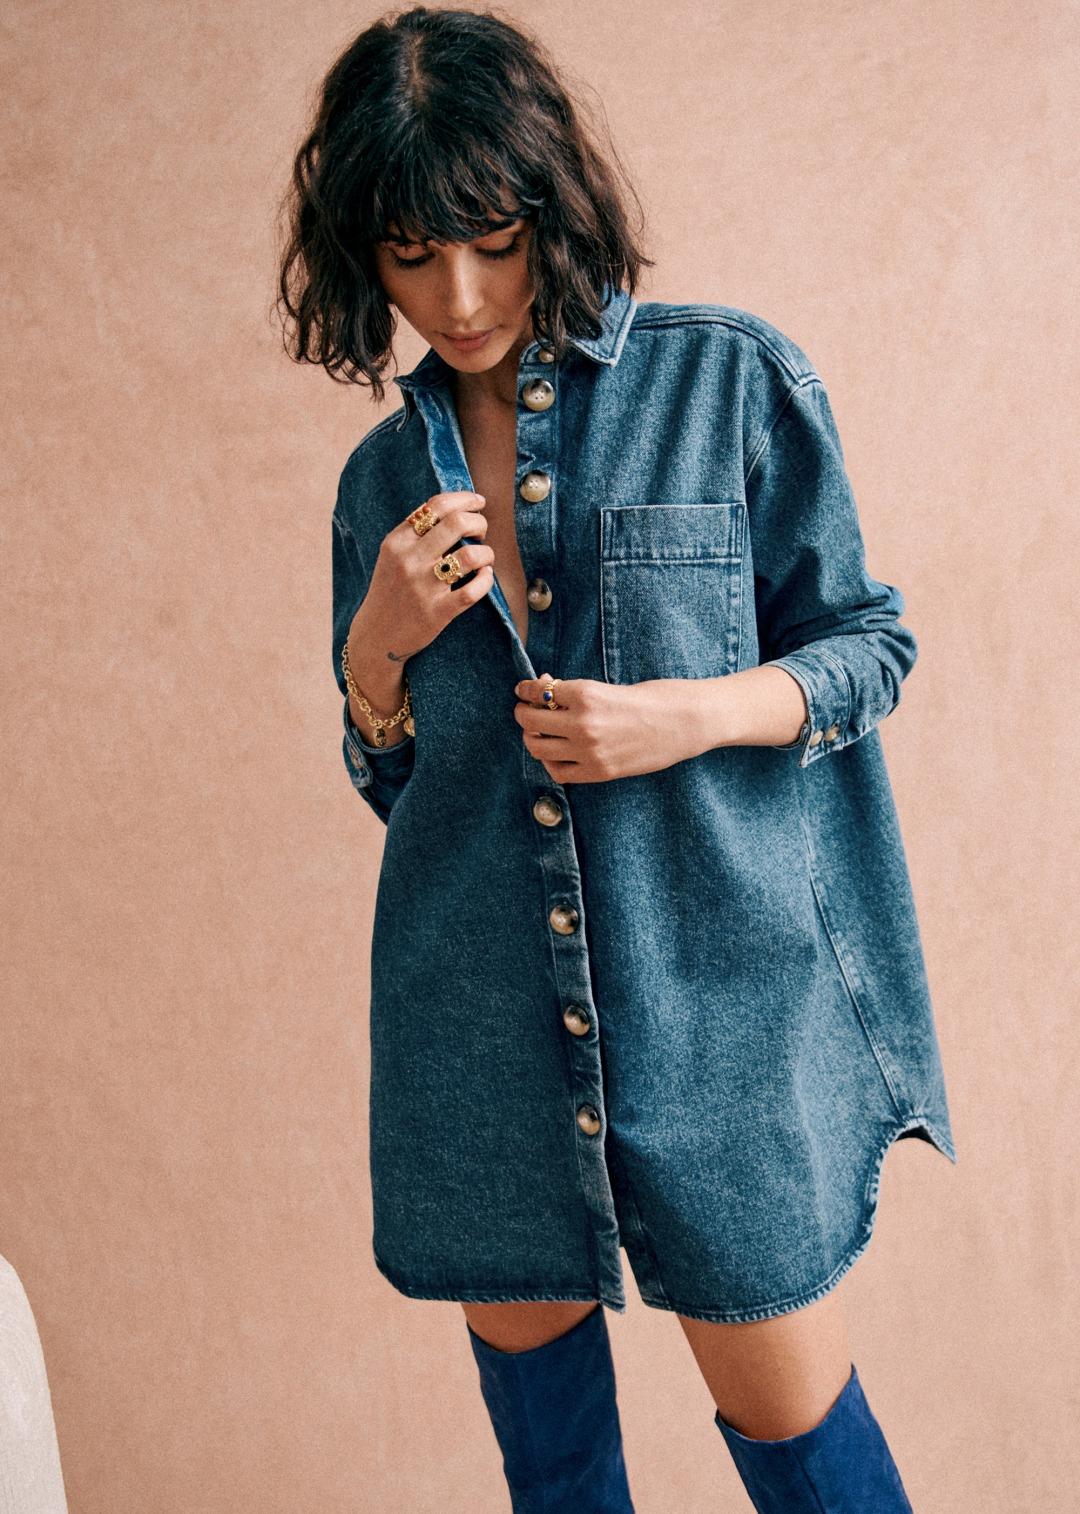 With a slightly oversized design, the Sofie robe features a short length and long sleeves for comfort and functionality. The button-down front and chest pocket add stylish touches, while the collared neck and side pockets offer practicality. Add this versatile piece to your wardrobe for an effortless, casual look.